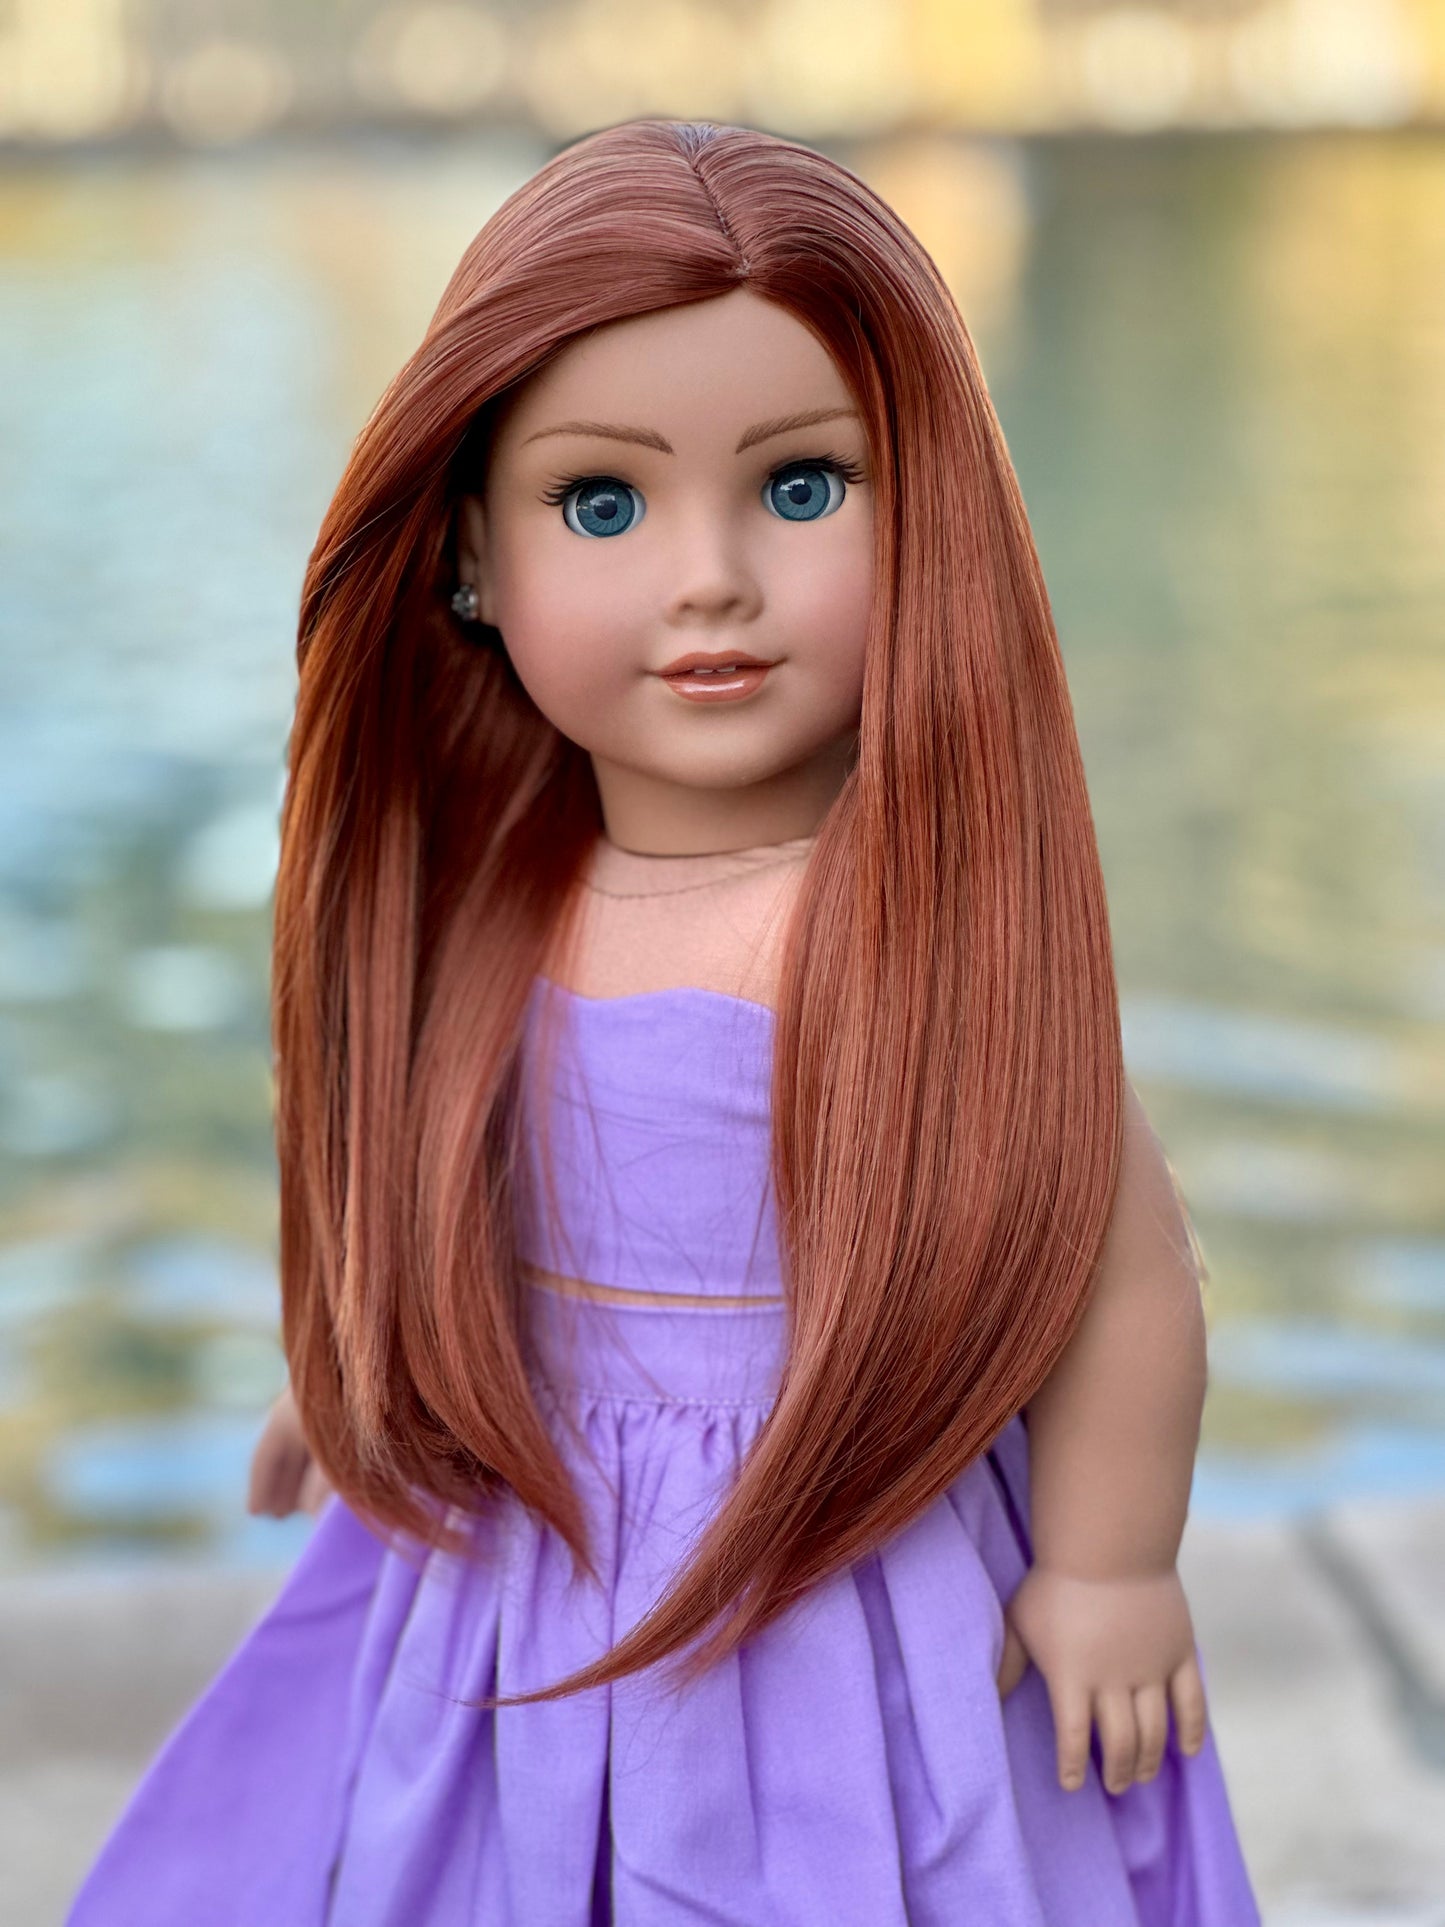 SECONDS CLEARANCE “Rosewood” IMPERFECT WIG